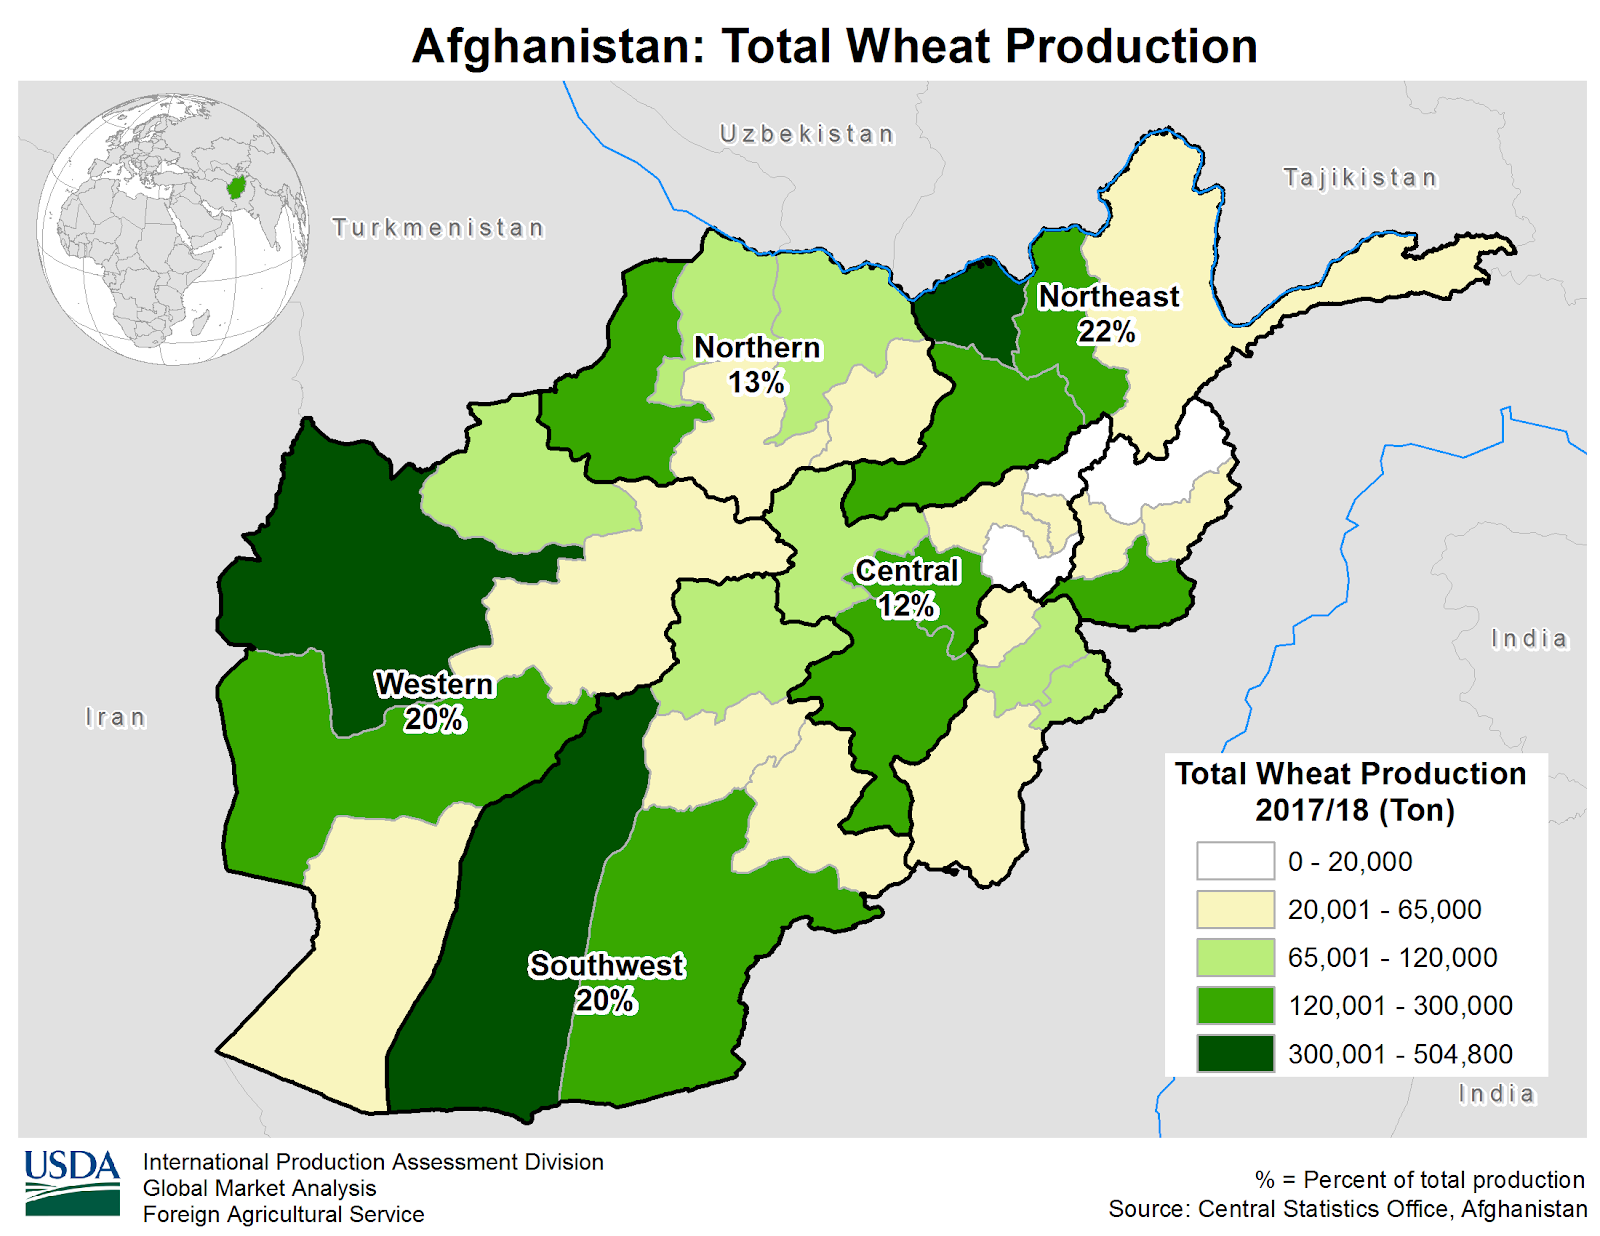 https://ipad.fas.usda.gov/countrysummary/images/AF/cropprod/Afghan_Prod_Total_Wheat.png